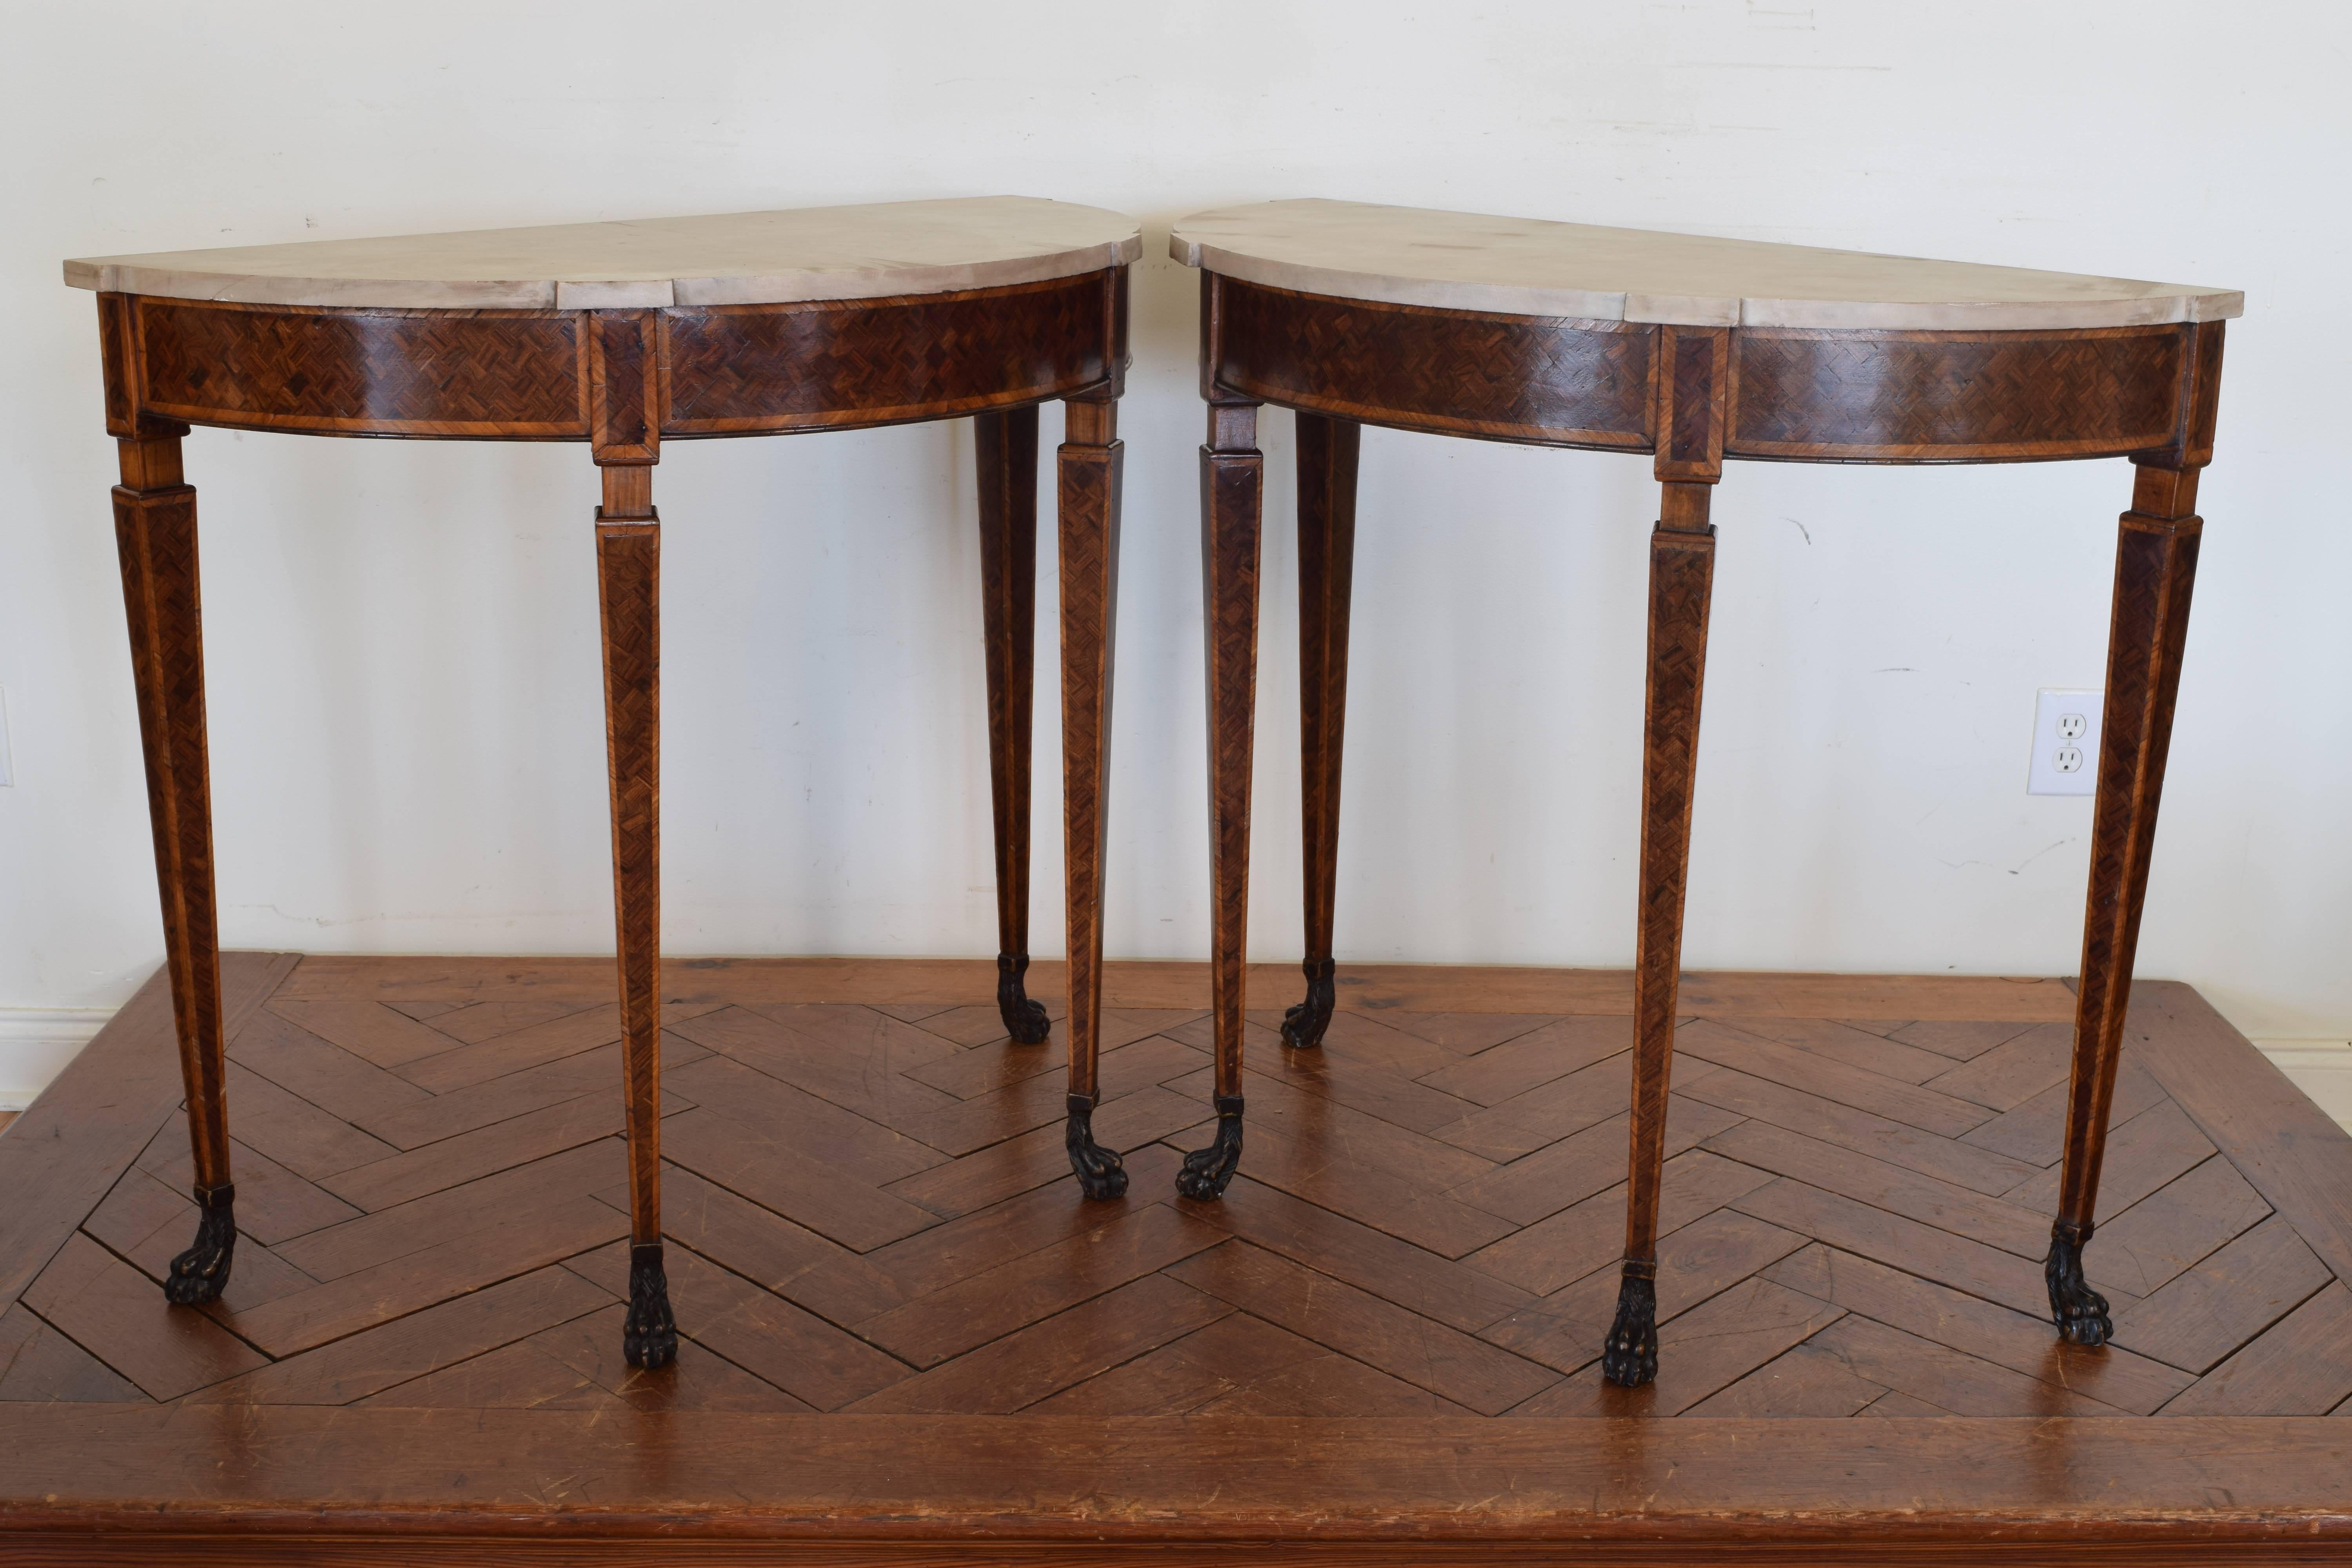 Pair of demilune form and having marble tops with notches above front legs, covered in walnut veneers, square tapering legs resting on ebonized paw feet, 19th century.